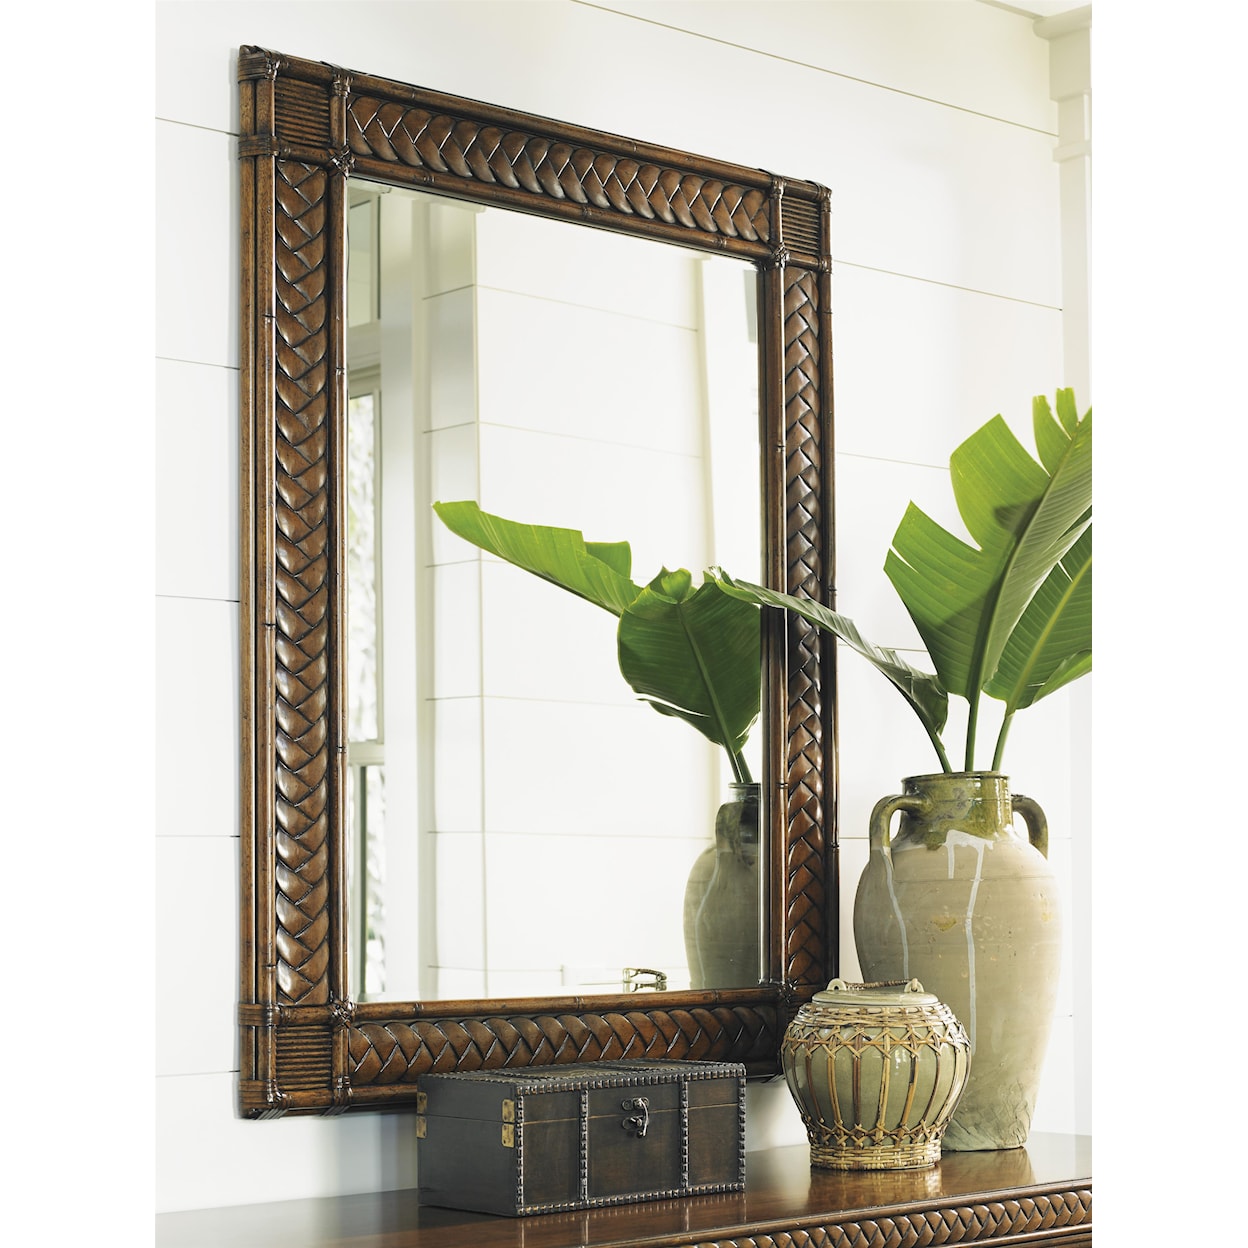 Tommy Bahama Home Bali Hai Breakers Double Dresser and Mirror Set